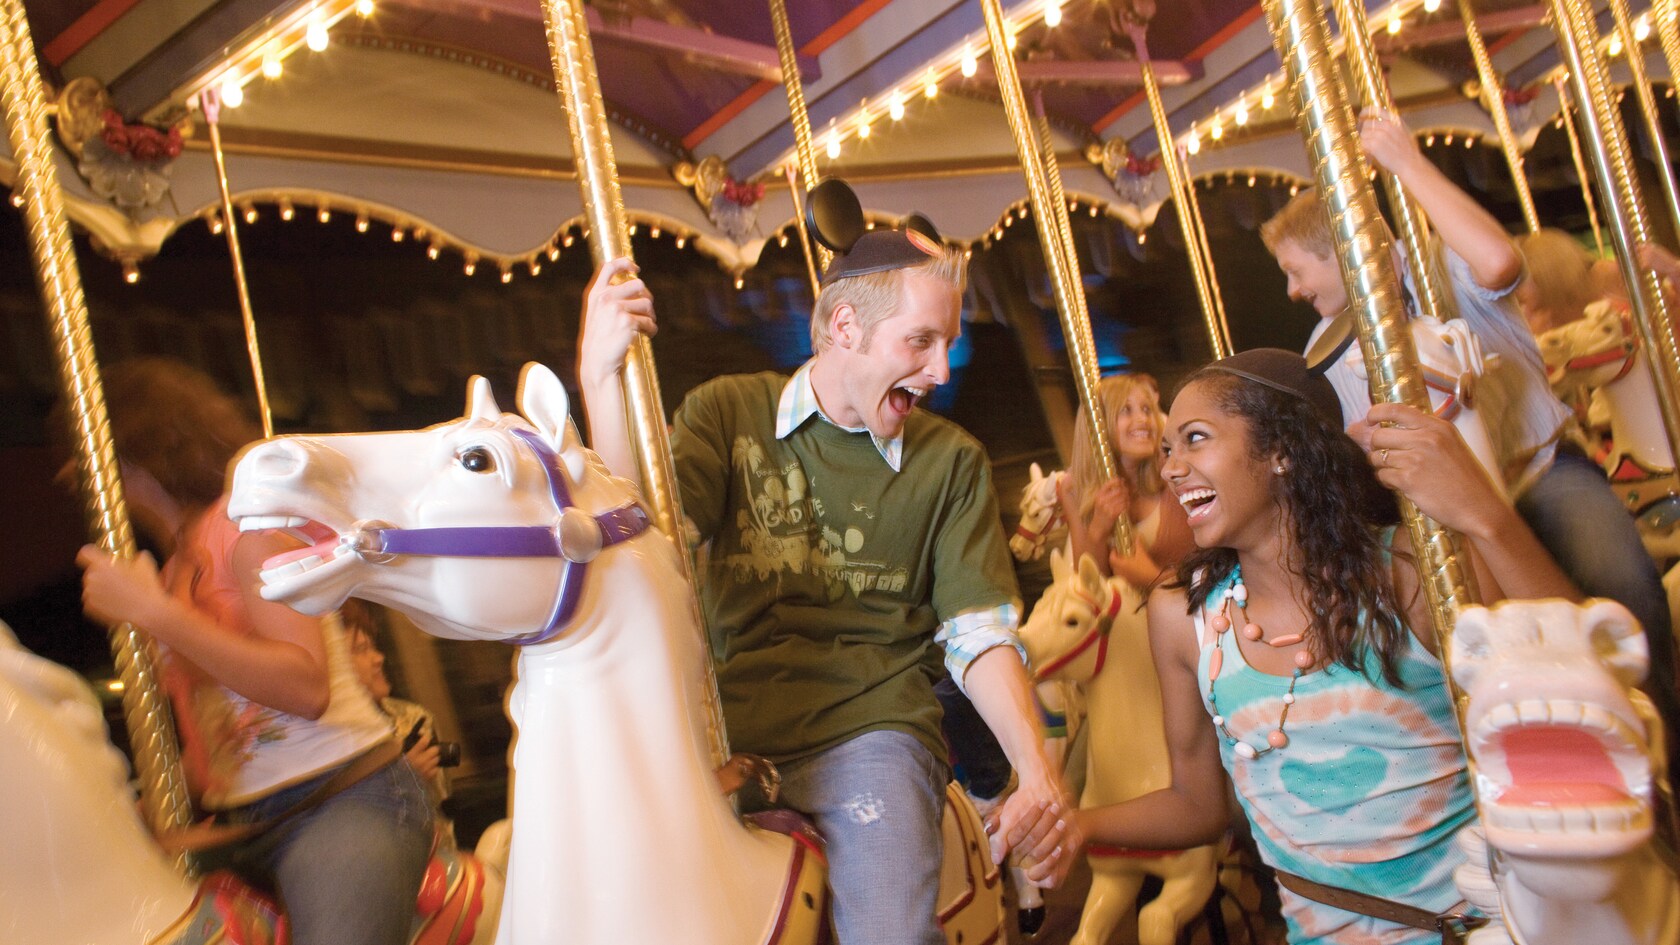 A couple laughs together on a carousel